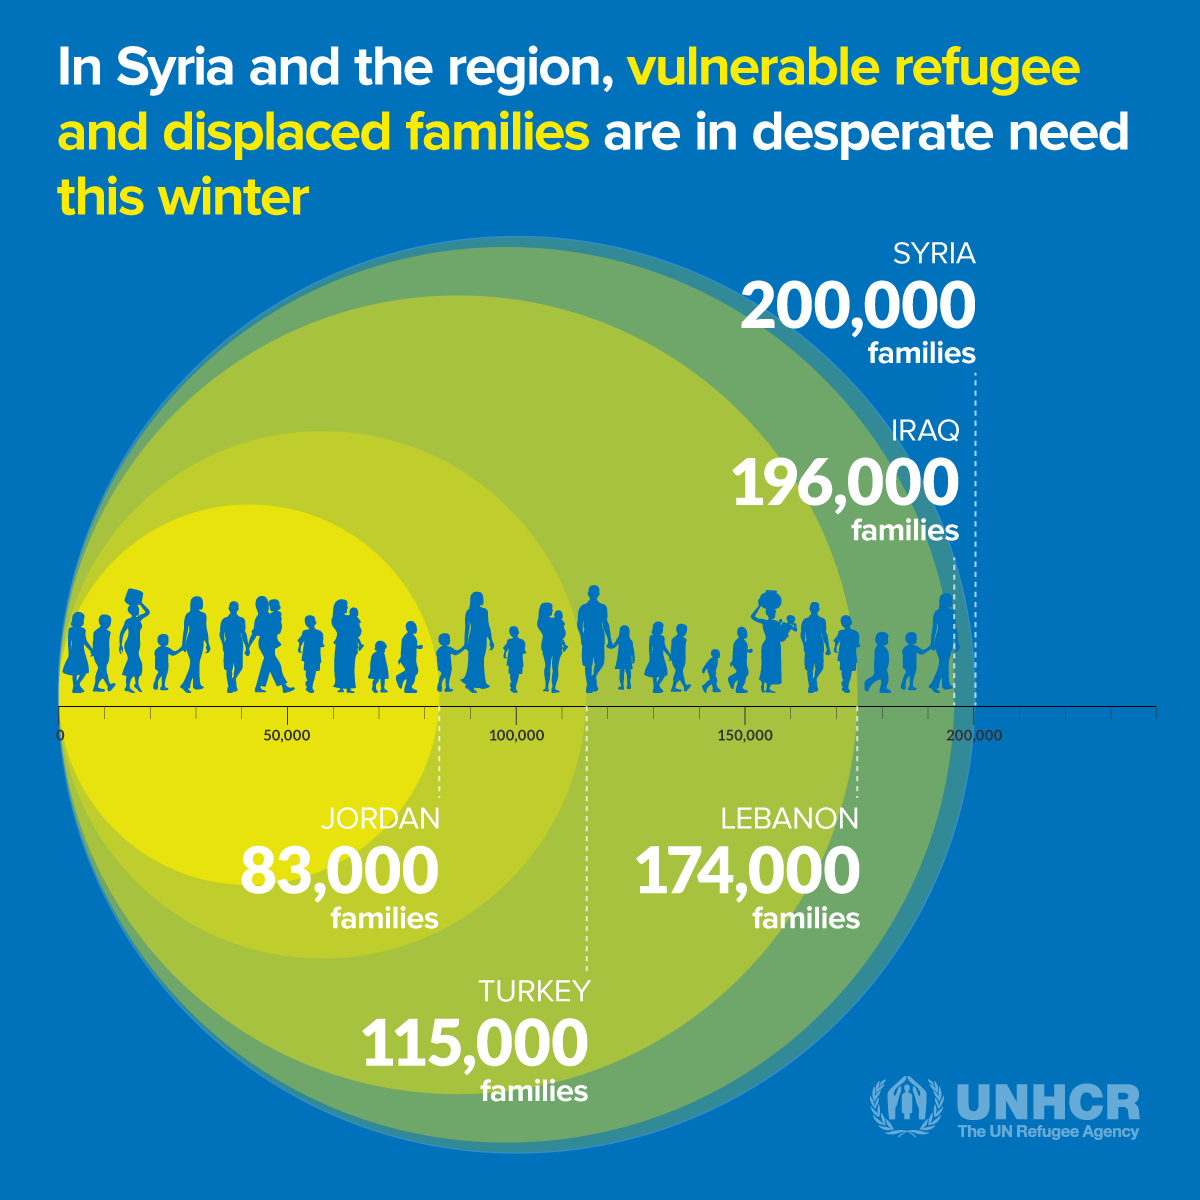 USA for UNHCR INFOGRAPHIC - In Syria and the region, vulnerable refugee and displaced families are in desperate need this winter...